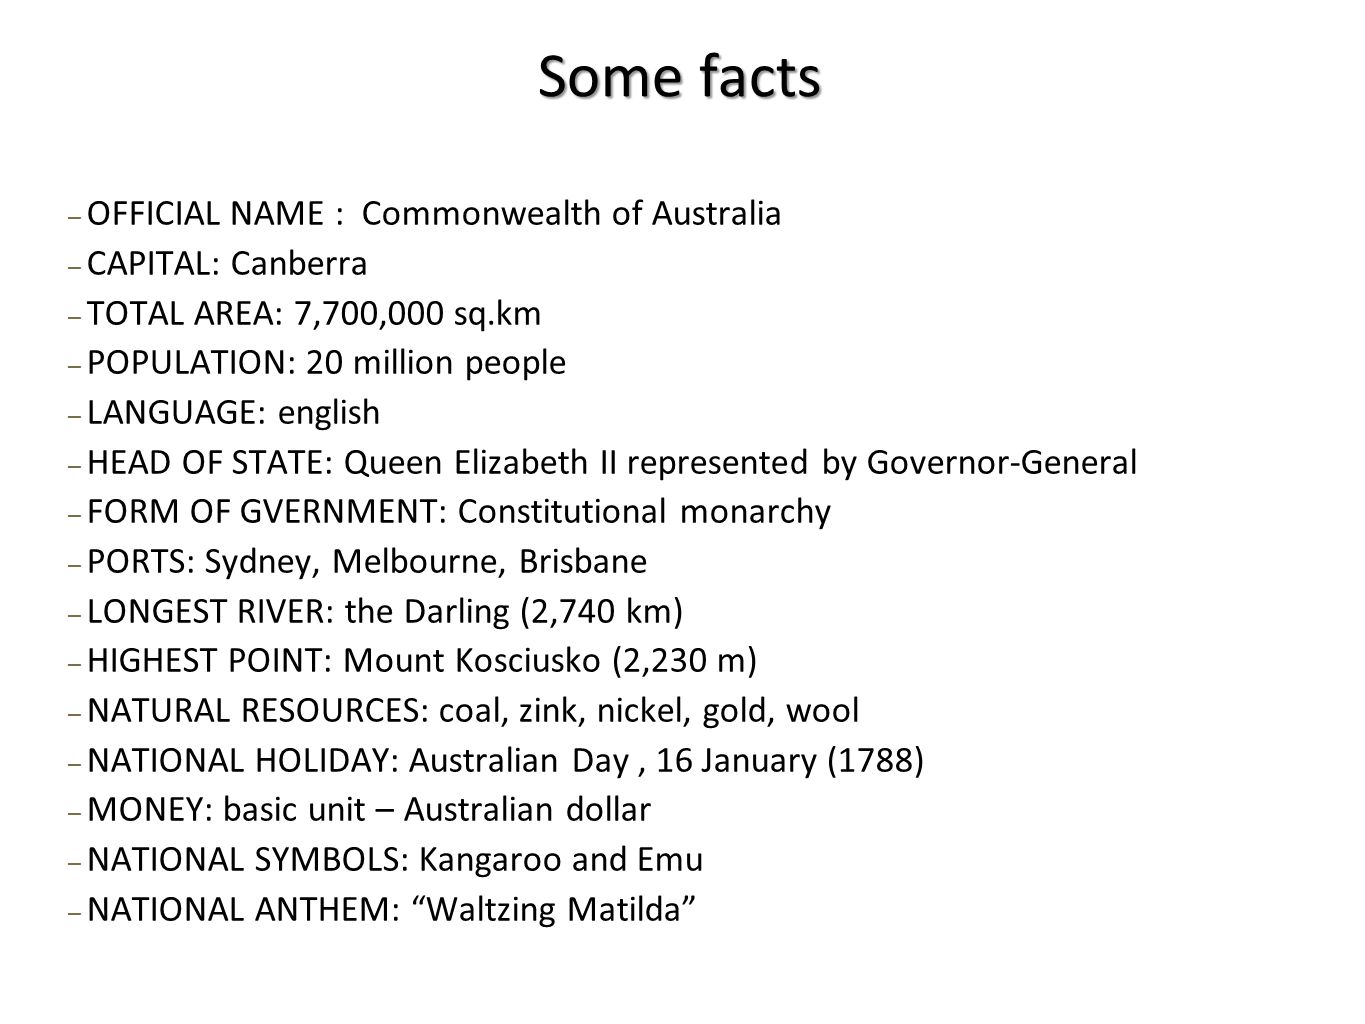 ─ OFFICIAL NAME : Commonwealth of Australia ─ CAPITAL: Canberra ─ TOTAL AREA: 7,700,000 sq.km ─ POPULATION: 20 million people ─ LANGUAGE: english ─ HEAD OF STATE: Queen Elizabeth II represented by Governor-General ─ FORM OF GVERNMENT: Constitutional monarchy ─ PORTS: Sydney, Melbourne, Brisbane ─ LONGEST RIVER: the Darling (2,740 km) ─ HIGHEST POINT: Mount Kosciusko (2,230 m) ─ NATURAL RESOURCES: coal, zink, nickel, gold, wool ─ NATIONAL HOLIDAY: Australian Day, 16 January (1788) ─ MONEY: basic unit – Australian dollar ─ NATIONAL SYMBOLS: Kangaroo and Emu ─ NATIONAL ANTHEM: Waltzing Matilda Some facts